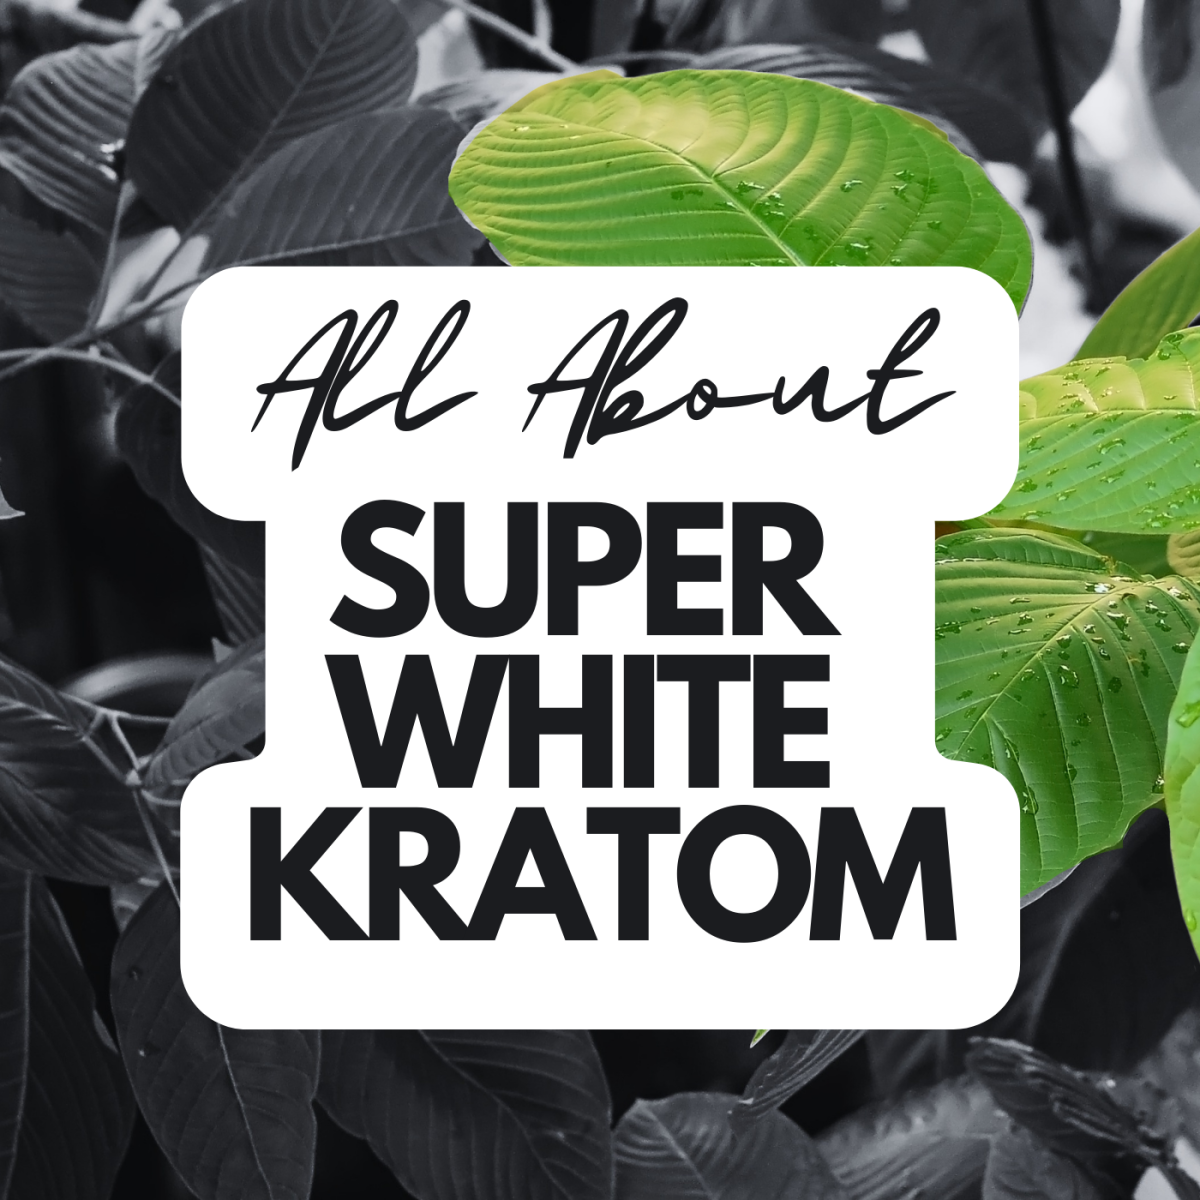 All You Need to Know About Super White Kratom